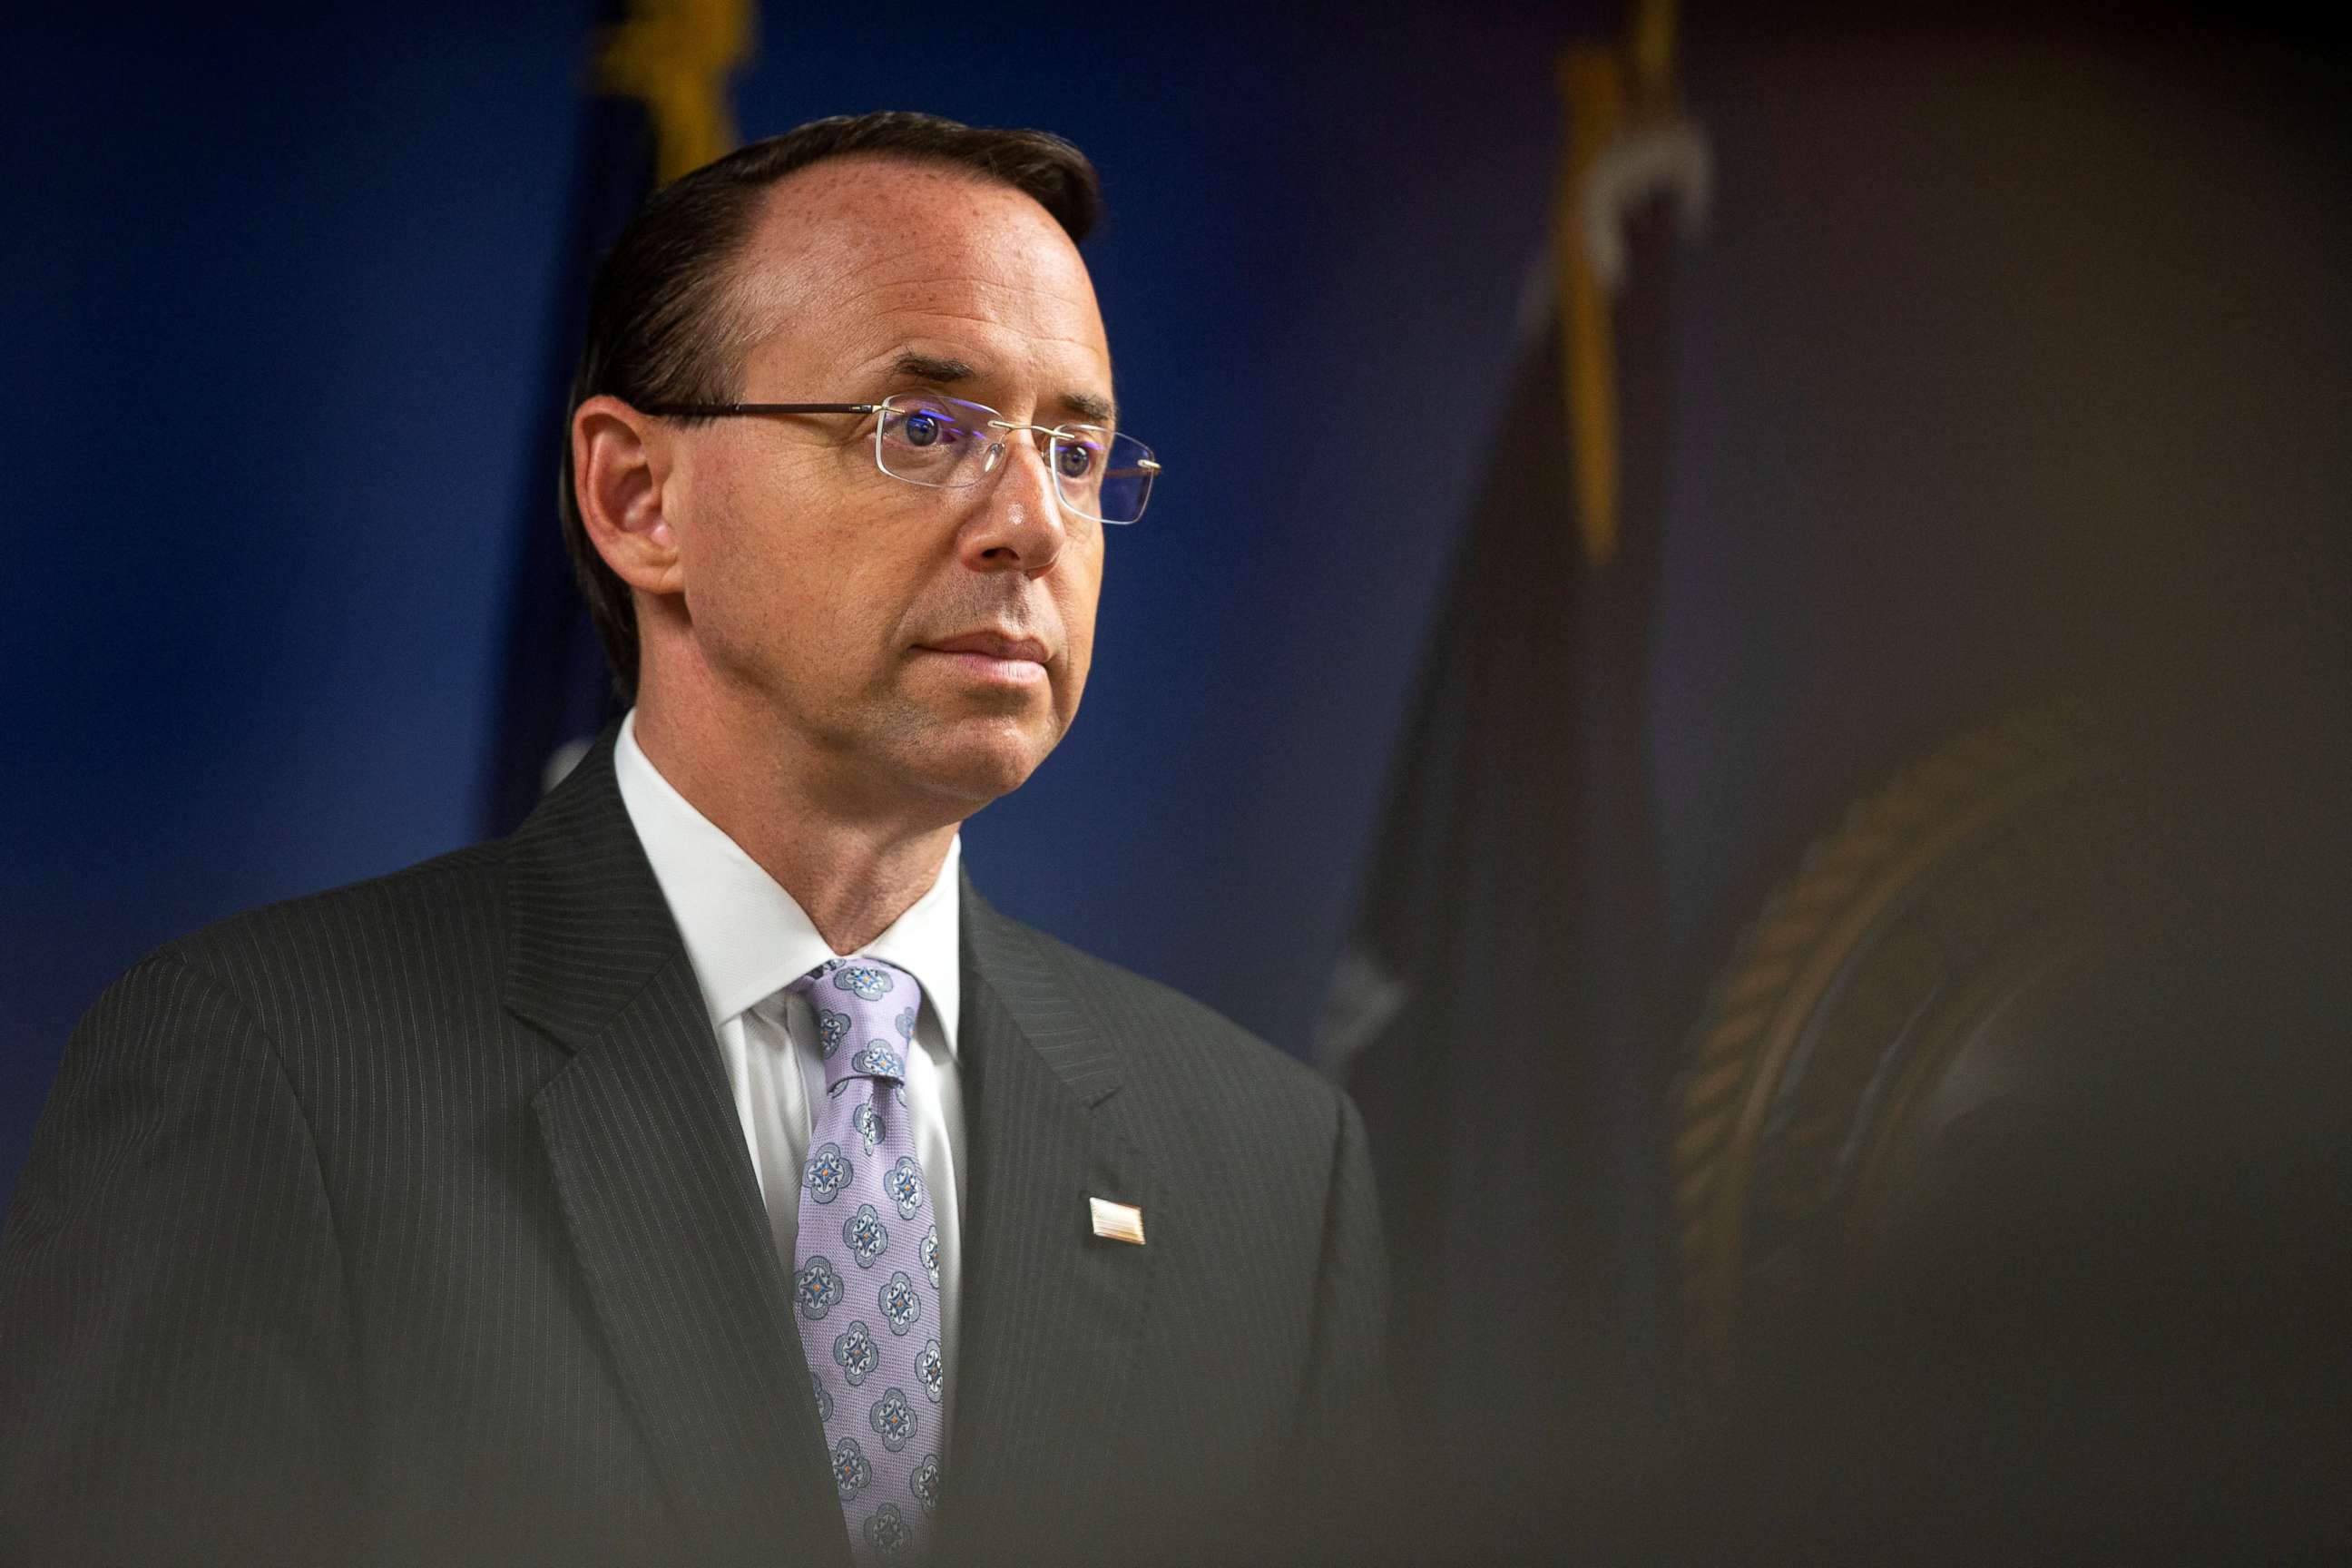 PHOTO: Deputy Attorney General Rod Rosenstein listens as U.S. Attorney General Jeff Sessions speaks during a news conference to announce efforts to reduce transnational crime, at the U.S. District Attorney's office, in Washington D.C., Oct. 15, 2018.